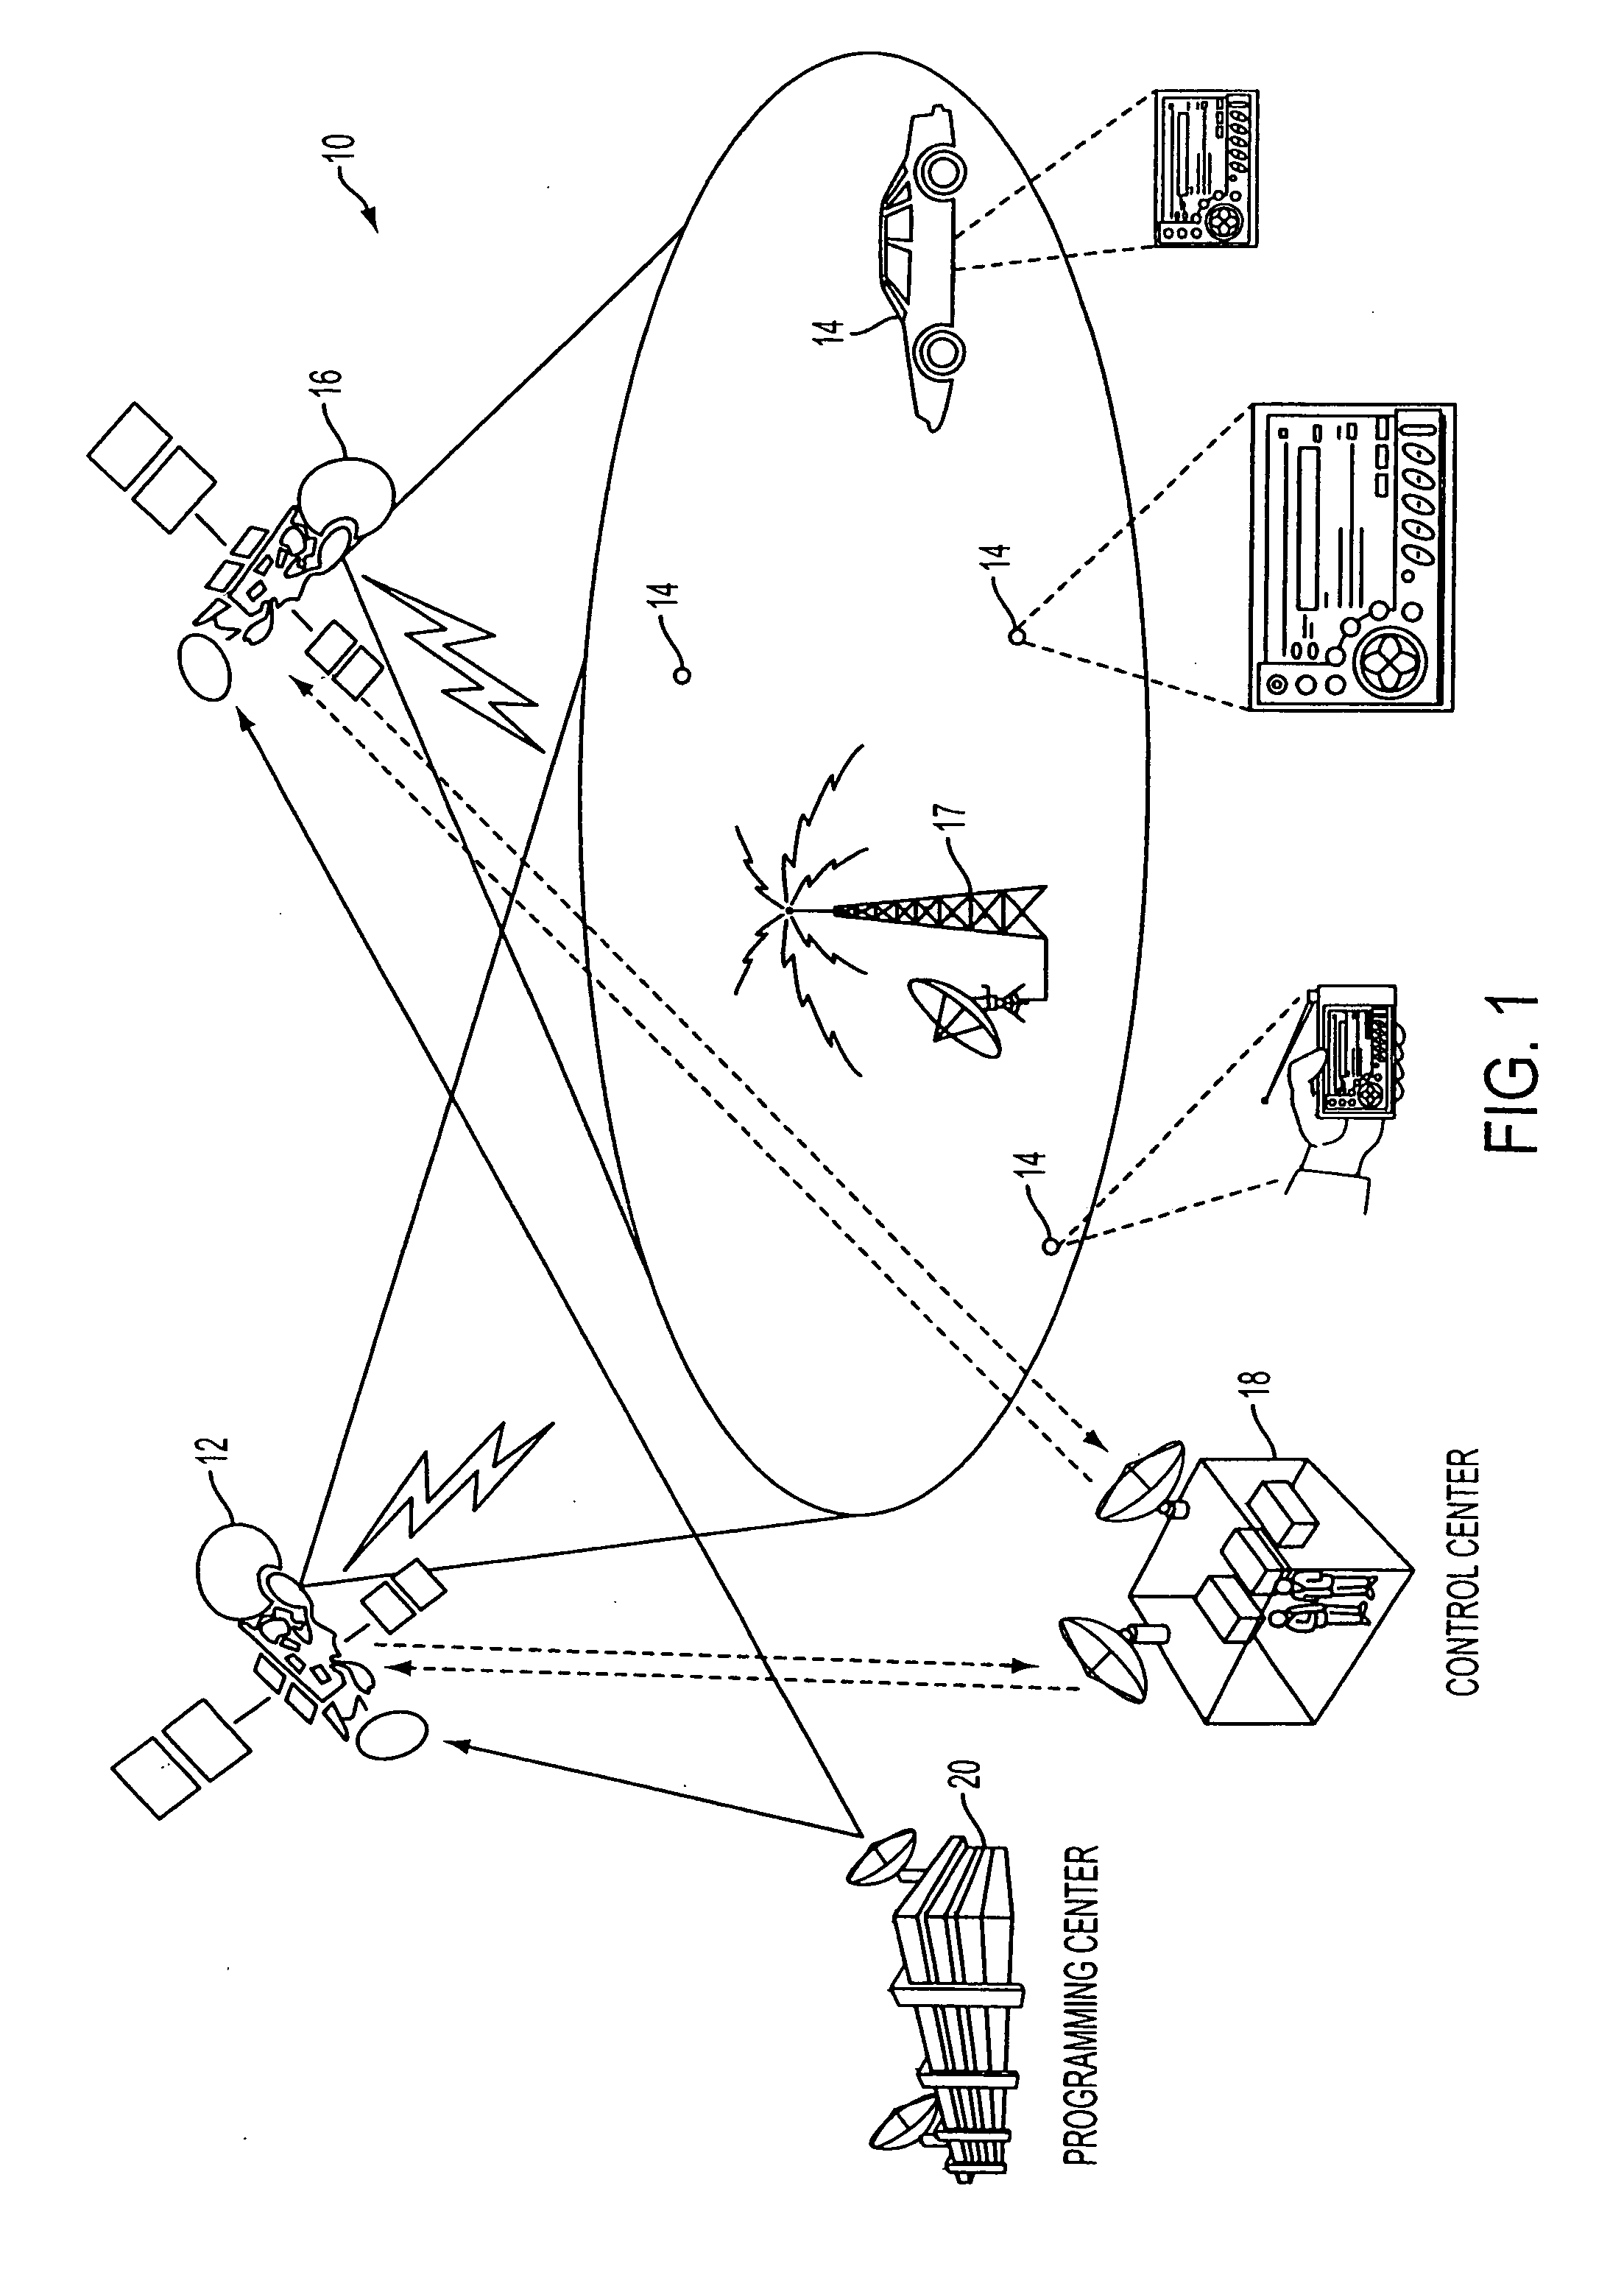 Method and apparatus for multiplexing audio program channels from one or more received broadcast streams to provide a playlist style listening experience to users